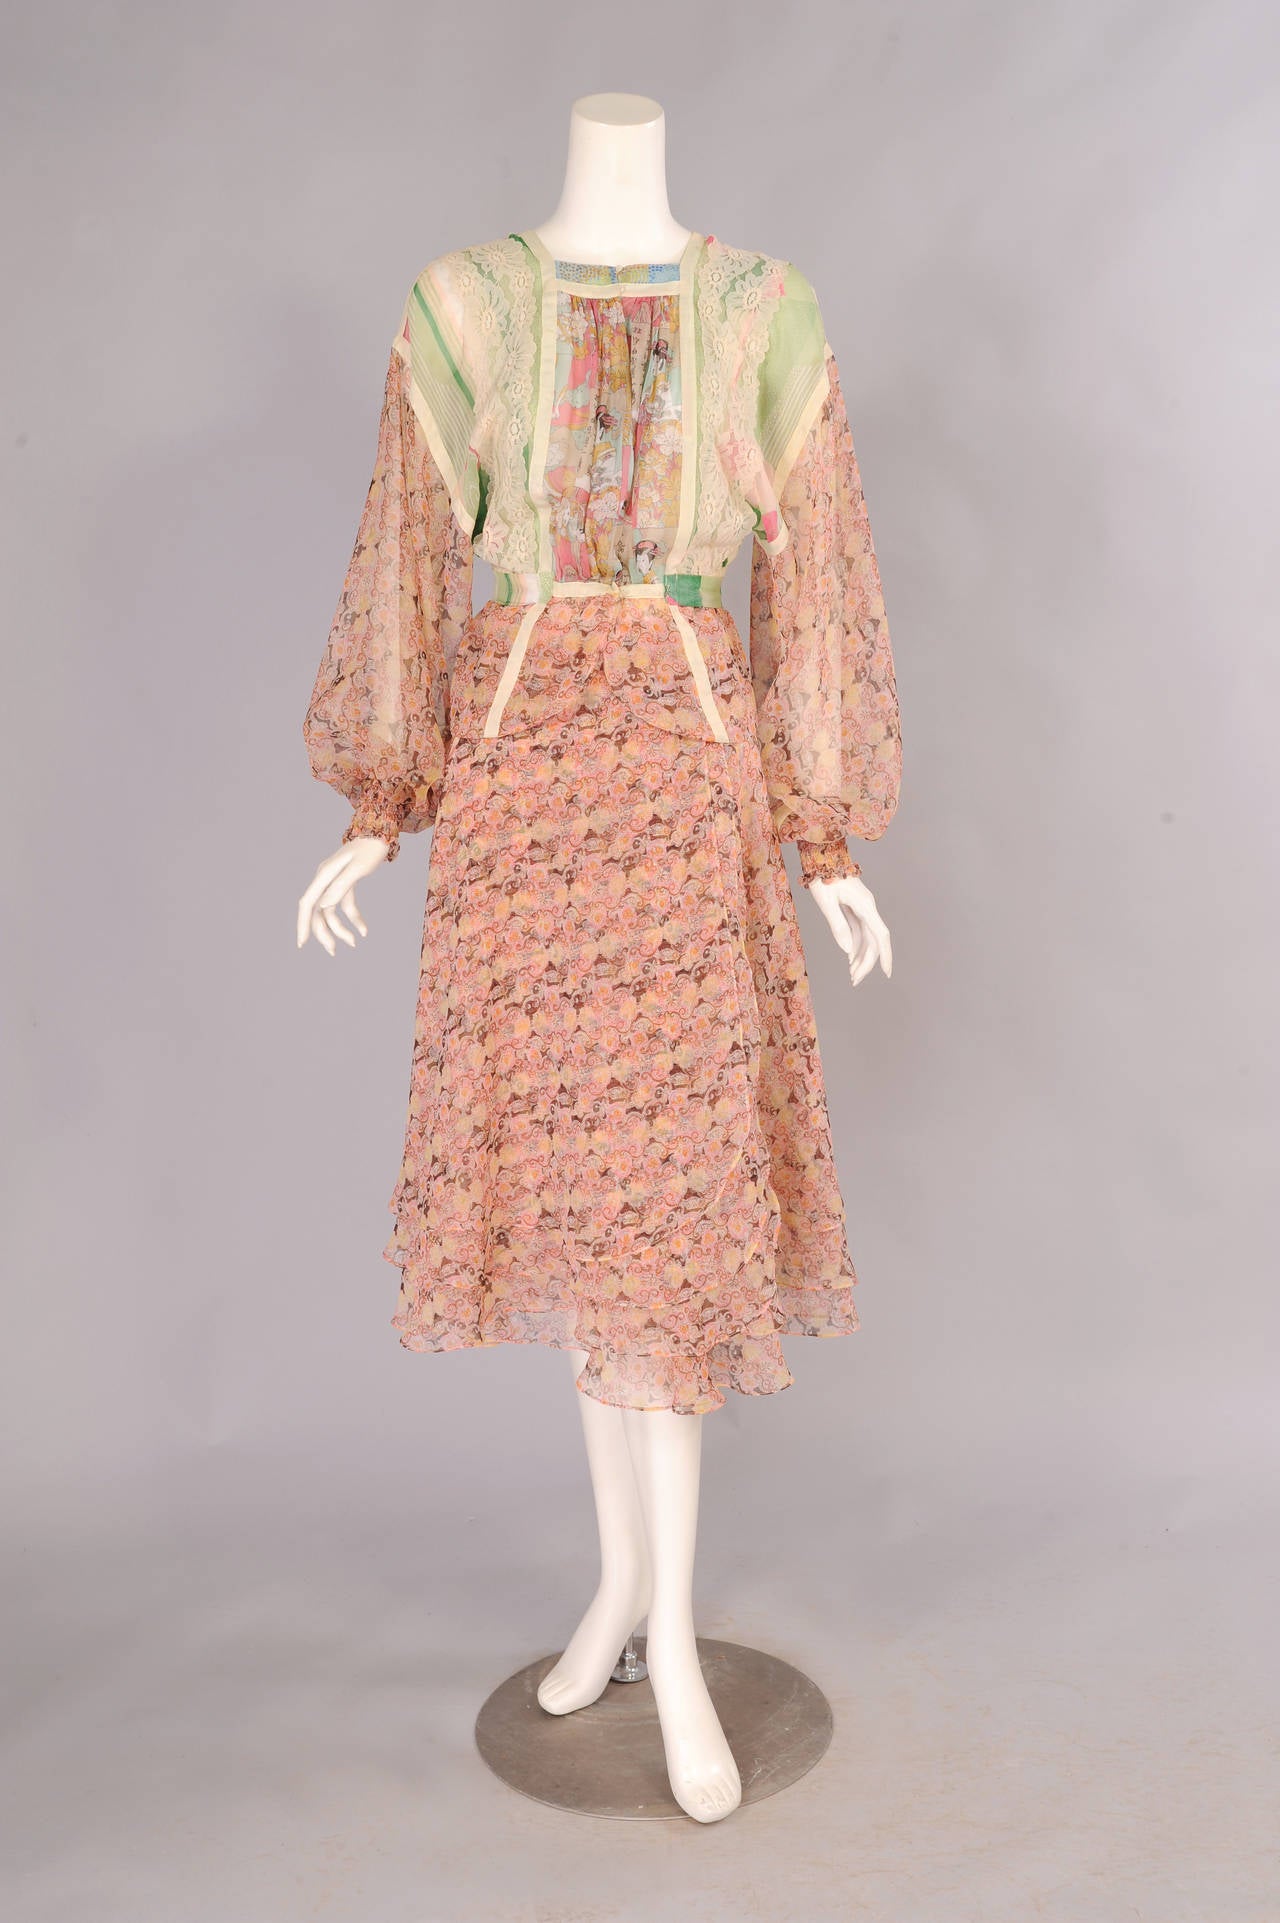 A charming combination of four printed chiffons with lace and ribbon trim is used for this ultra feminine blouse and wrap skirt designed by Koos Van Den Akker in the early 1970's. The top has a print with Japanese  ladies at the center front and